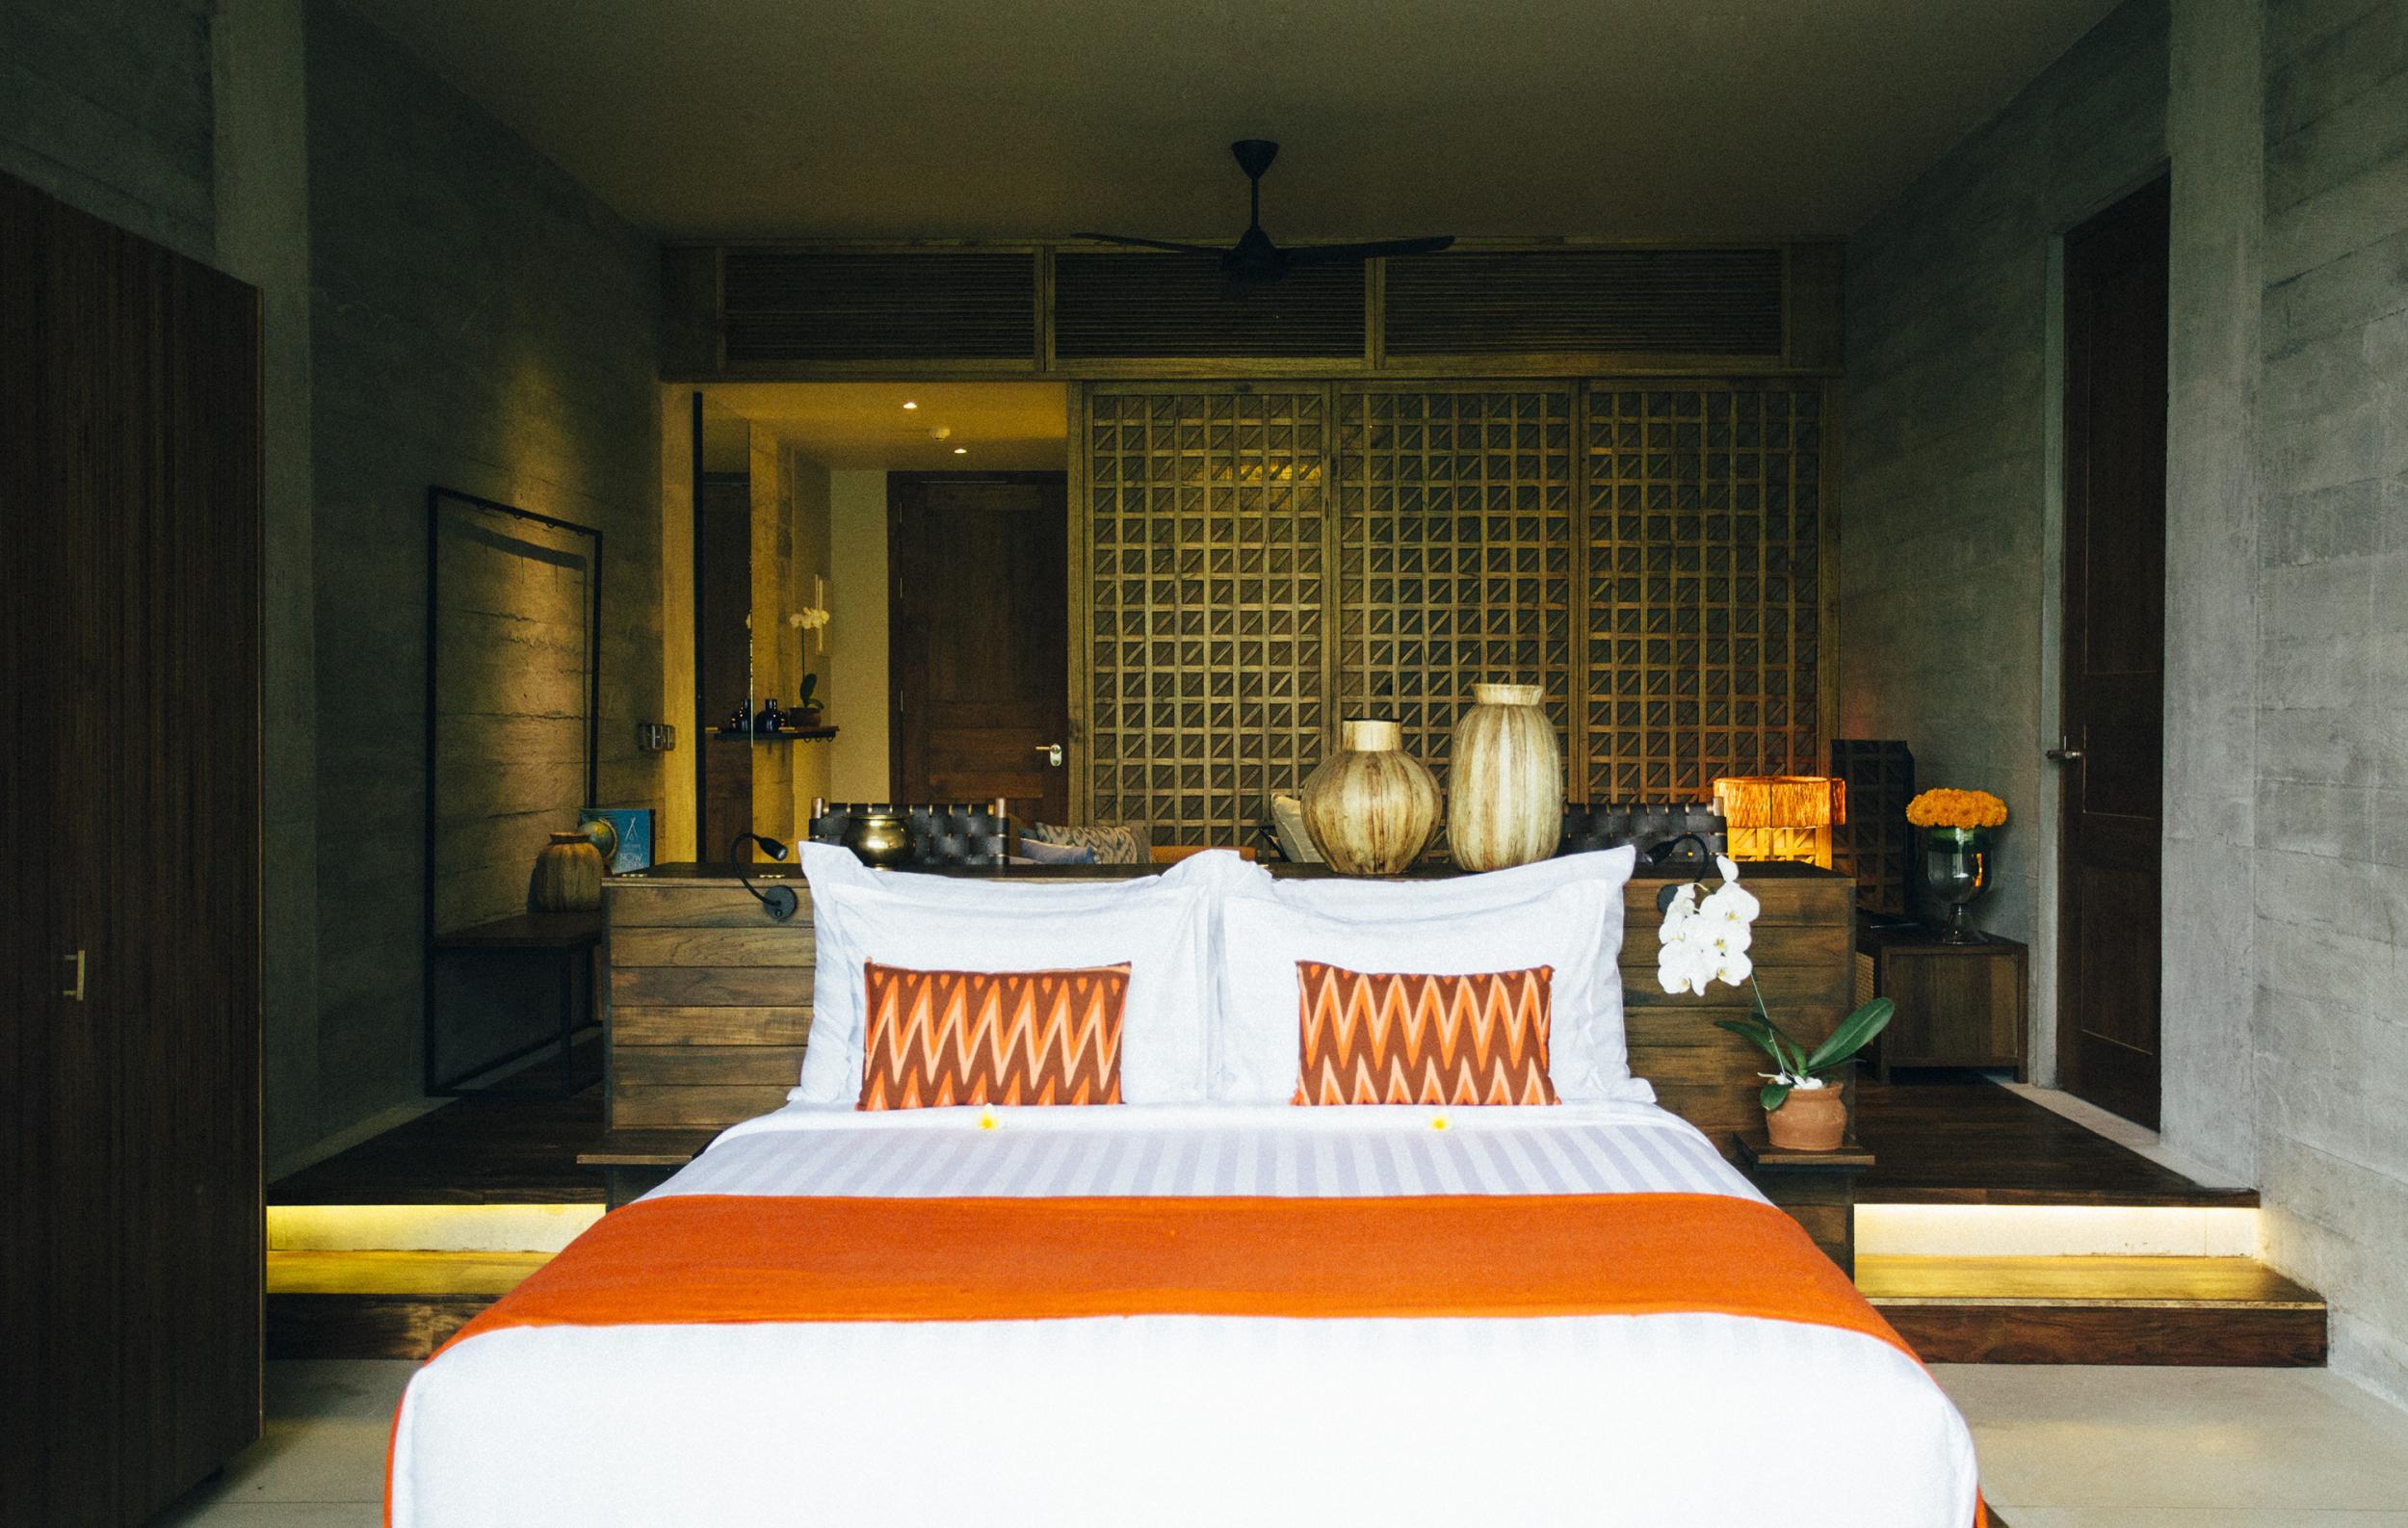 The rooms are as sumptuous as you'd expect for Bali